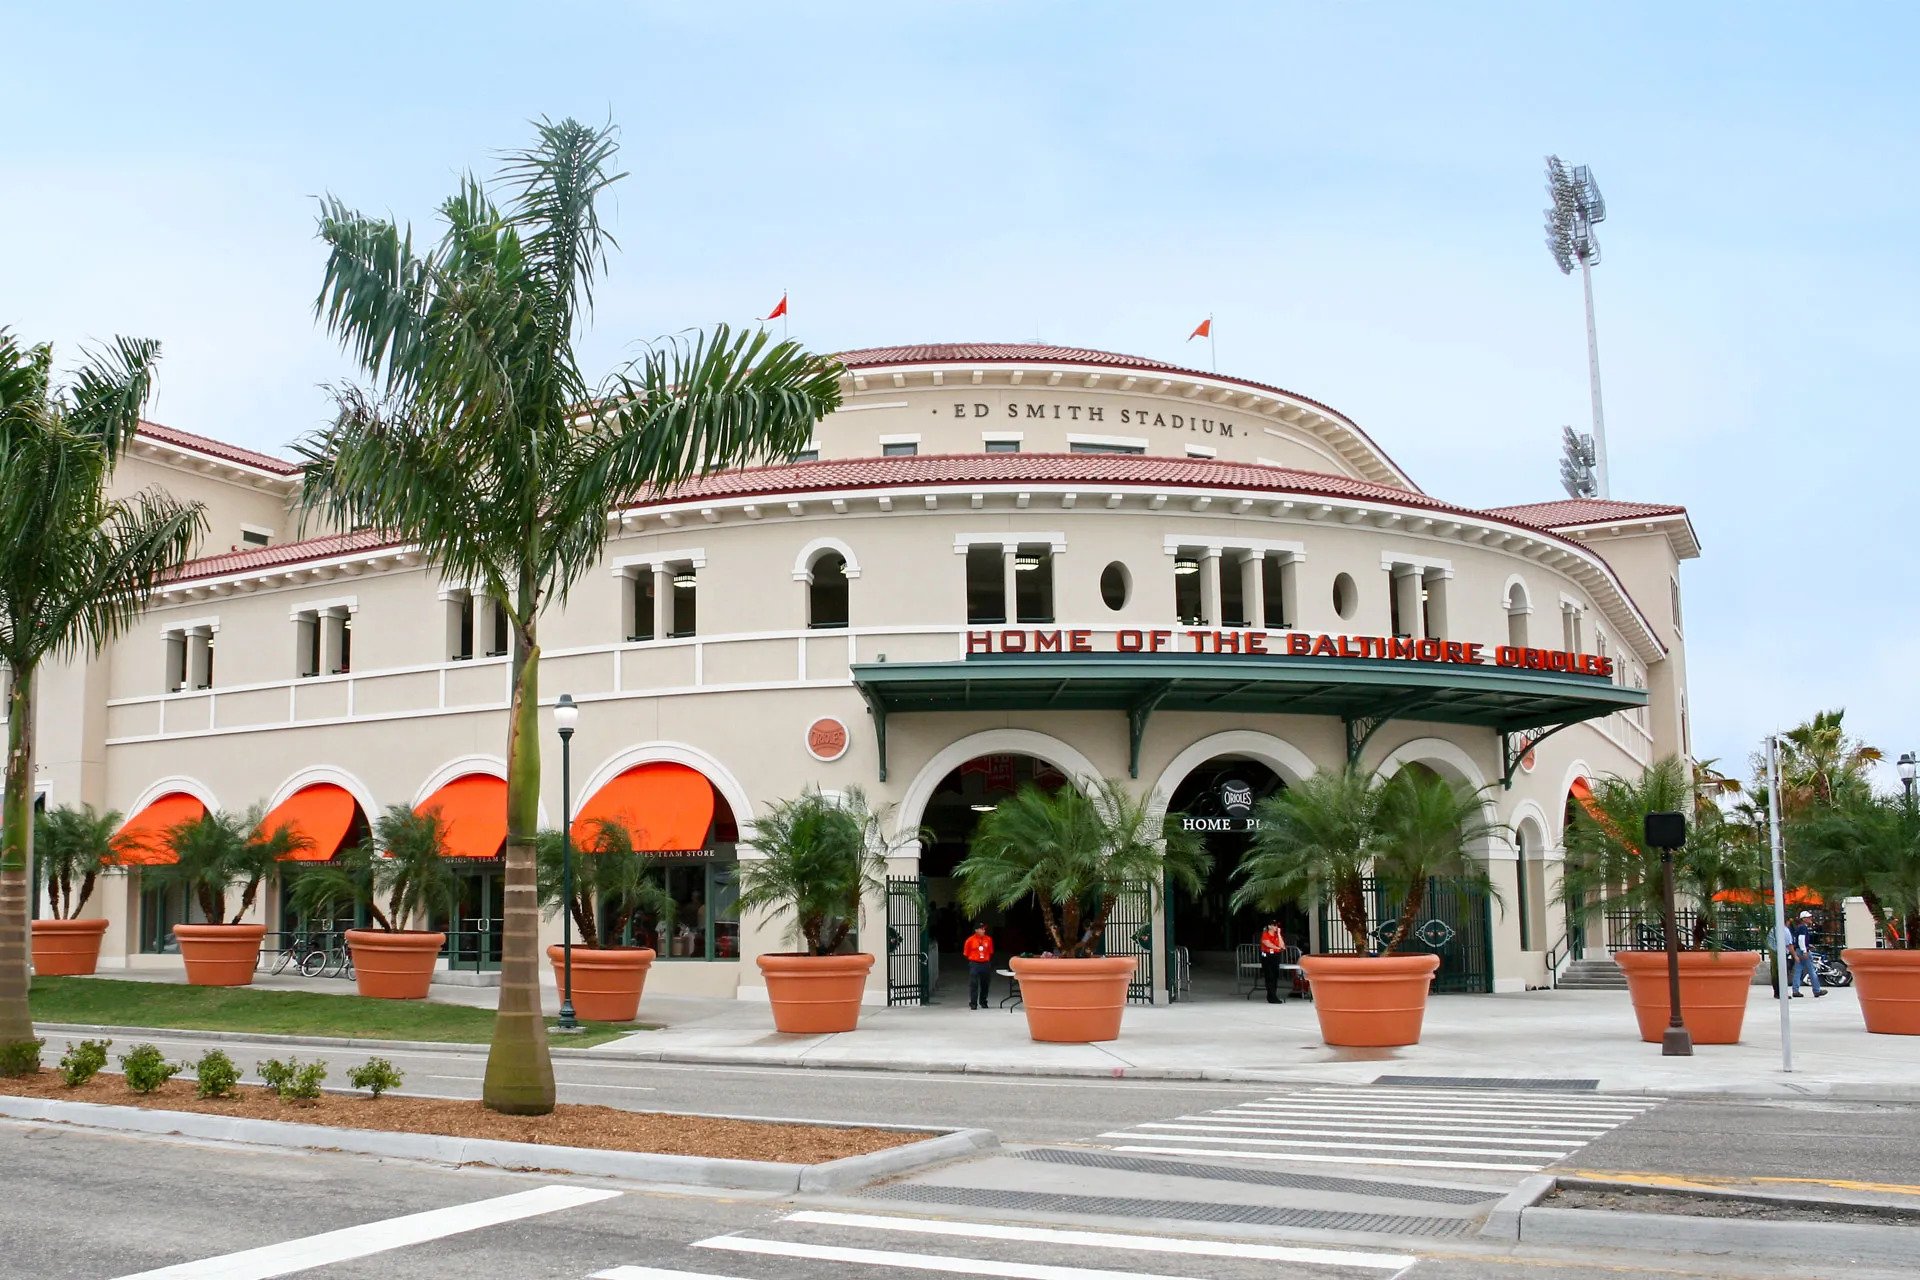 The Orioles' ballpark has the best exterior architecture in the Grapefruit League, in my opinion.